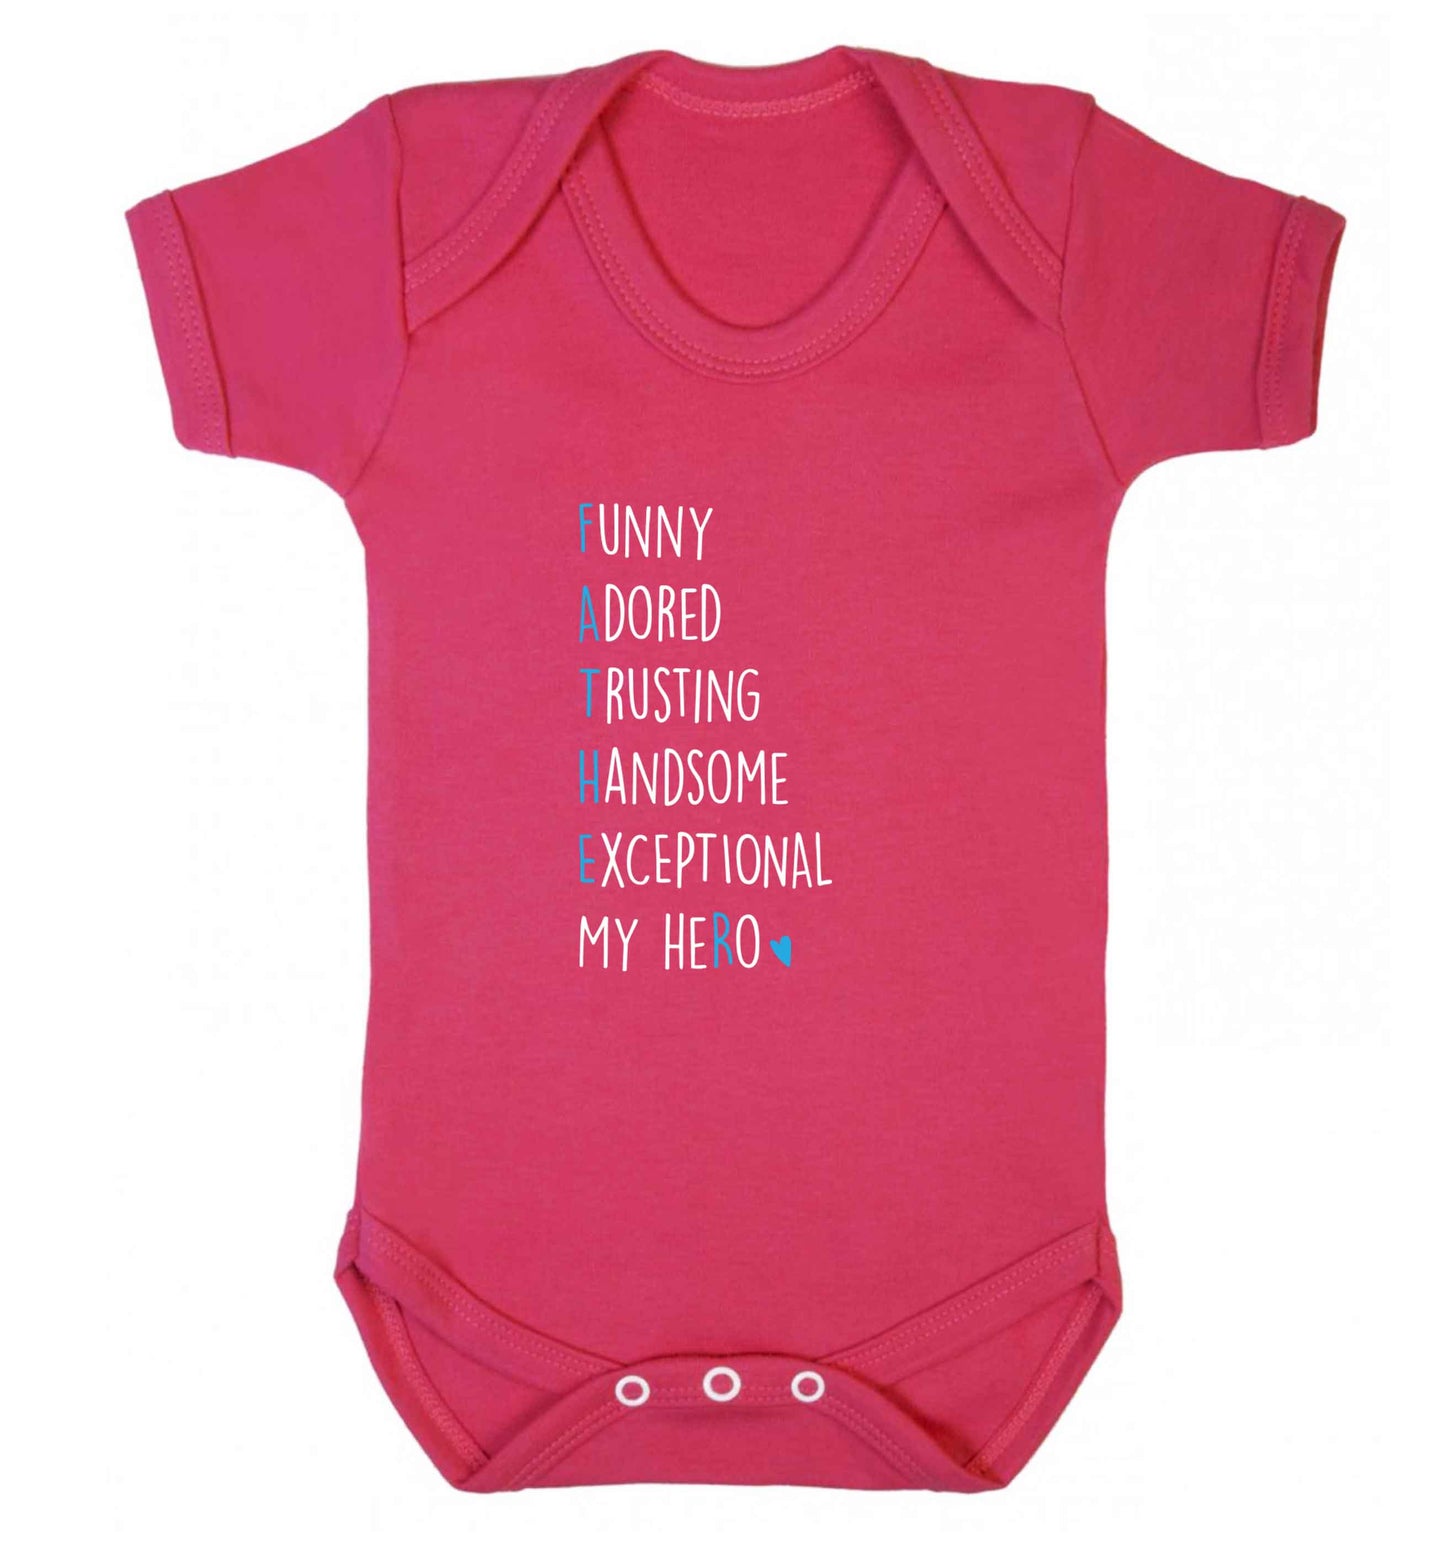 Father, funny adored trusting handsome exceptional my hero baby vest dark pink 18-24 months